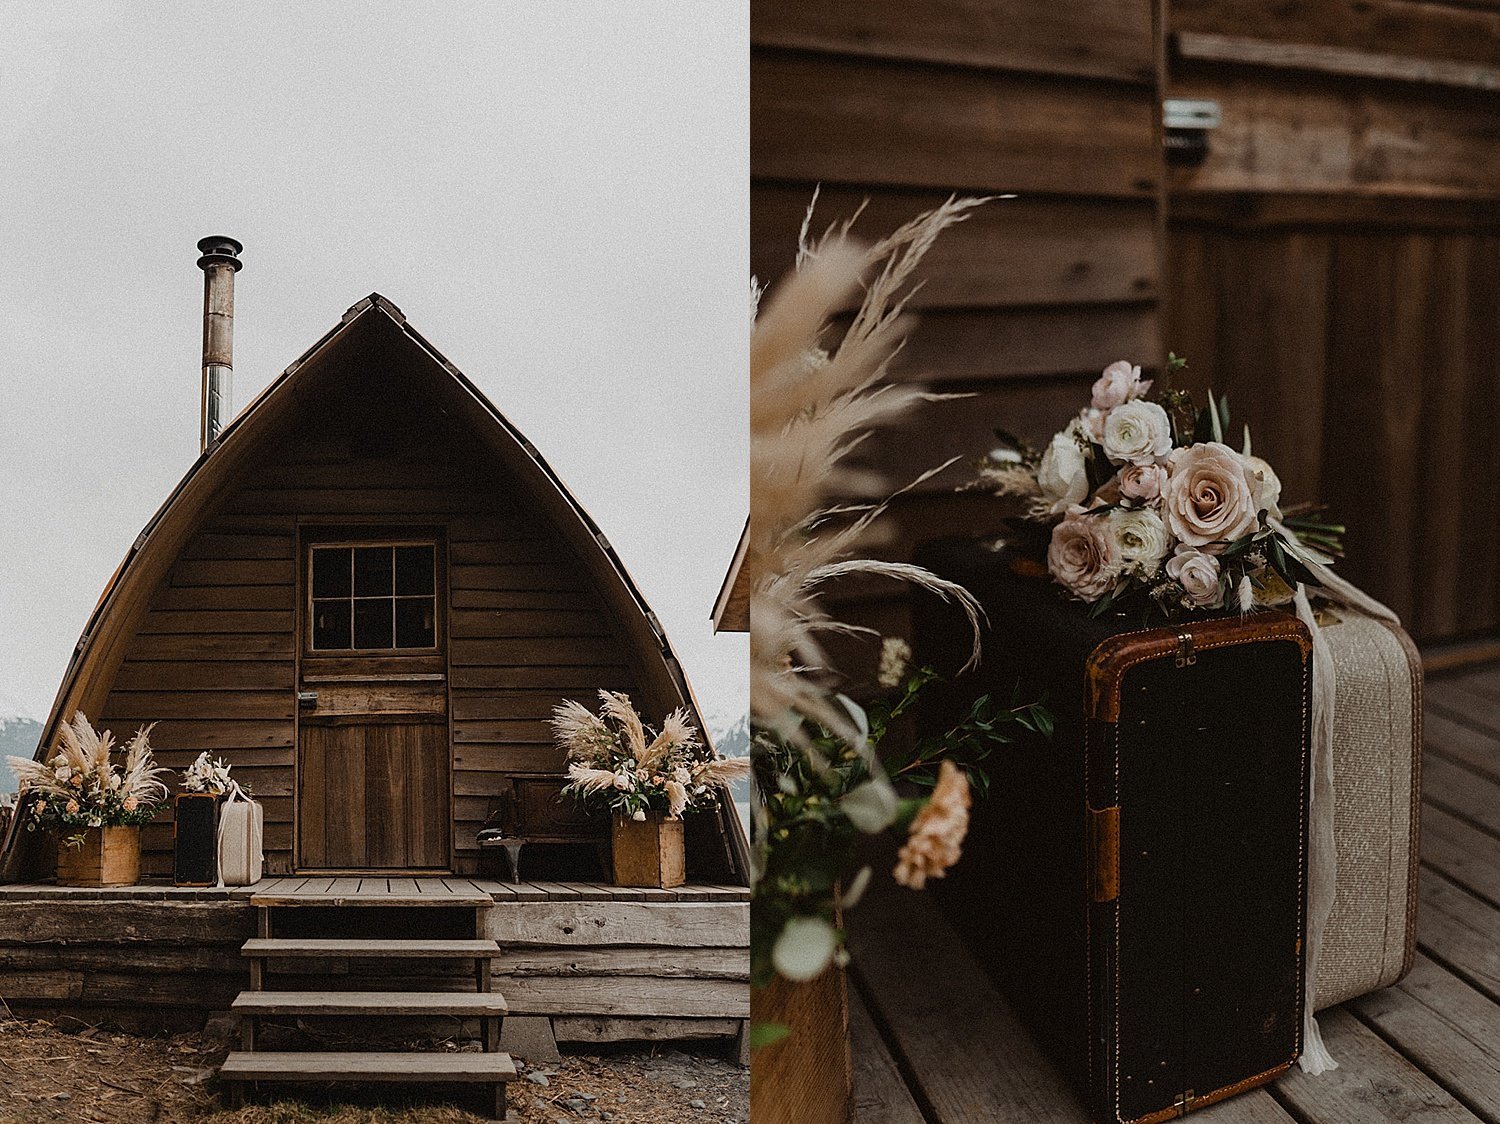  Rustic barn venue with porch and detail of wedding flowers, bouquet, and honeymoon suitcases in vintage inspired shoot 